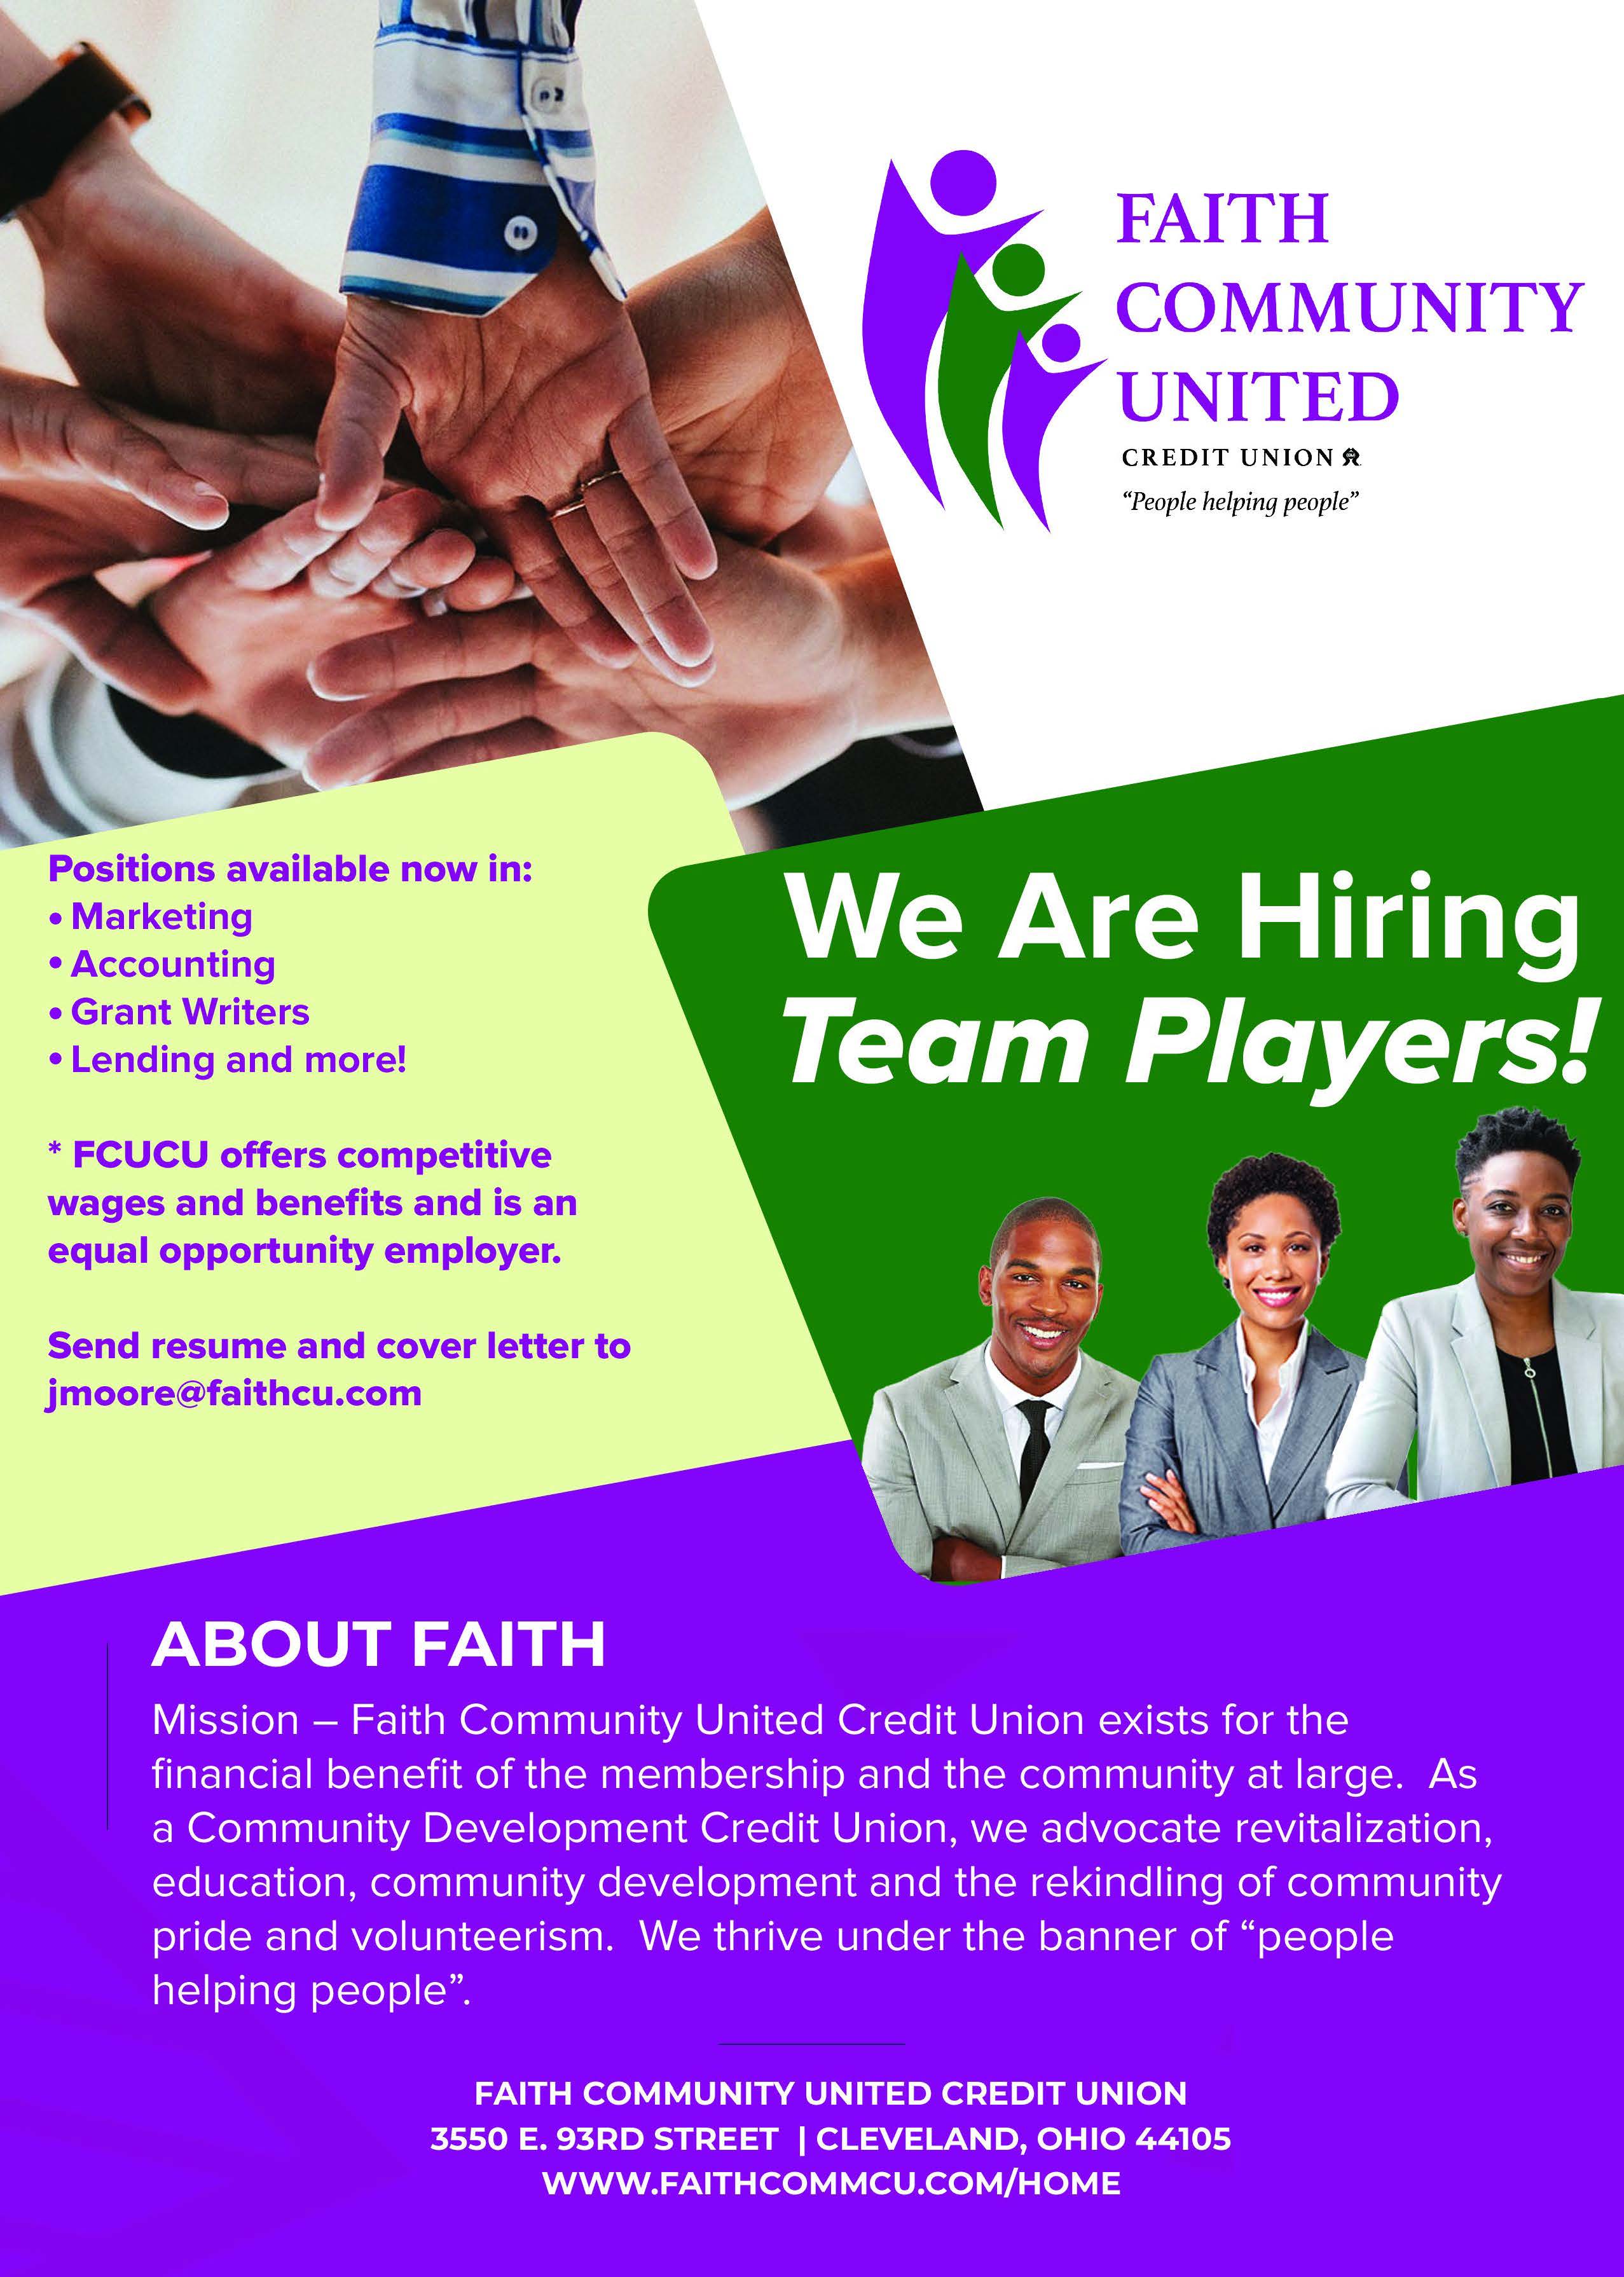 We are Hiring Team Players